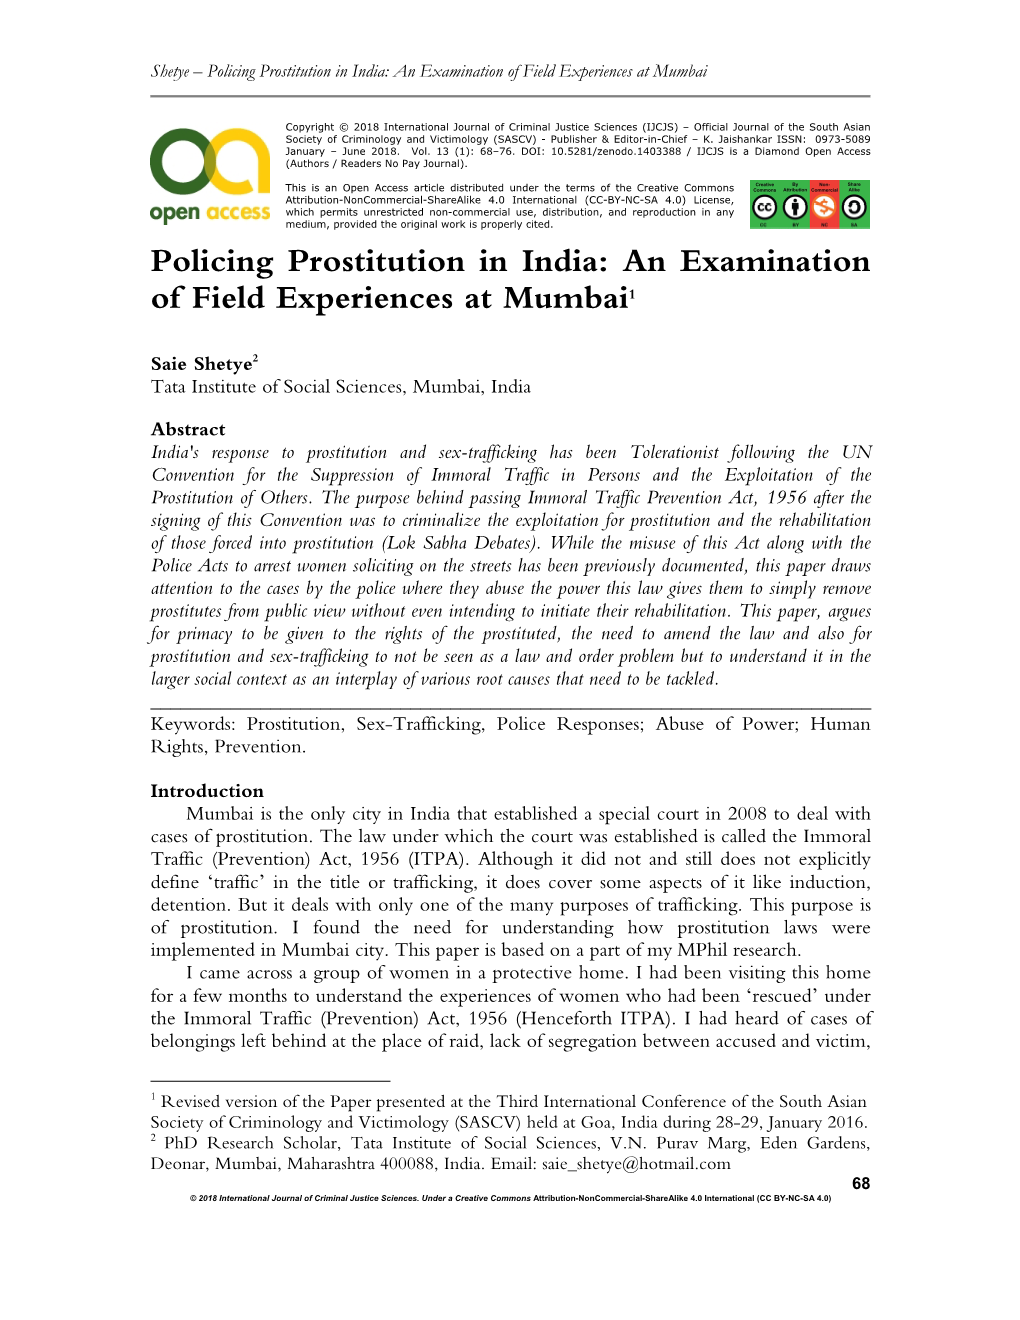 Policing Prostitution in India: an Examination of Field Experiences at Mumbai